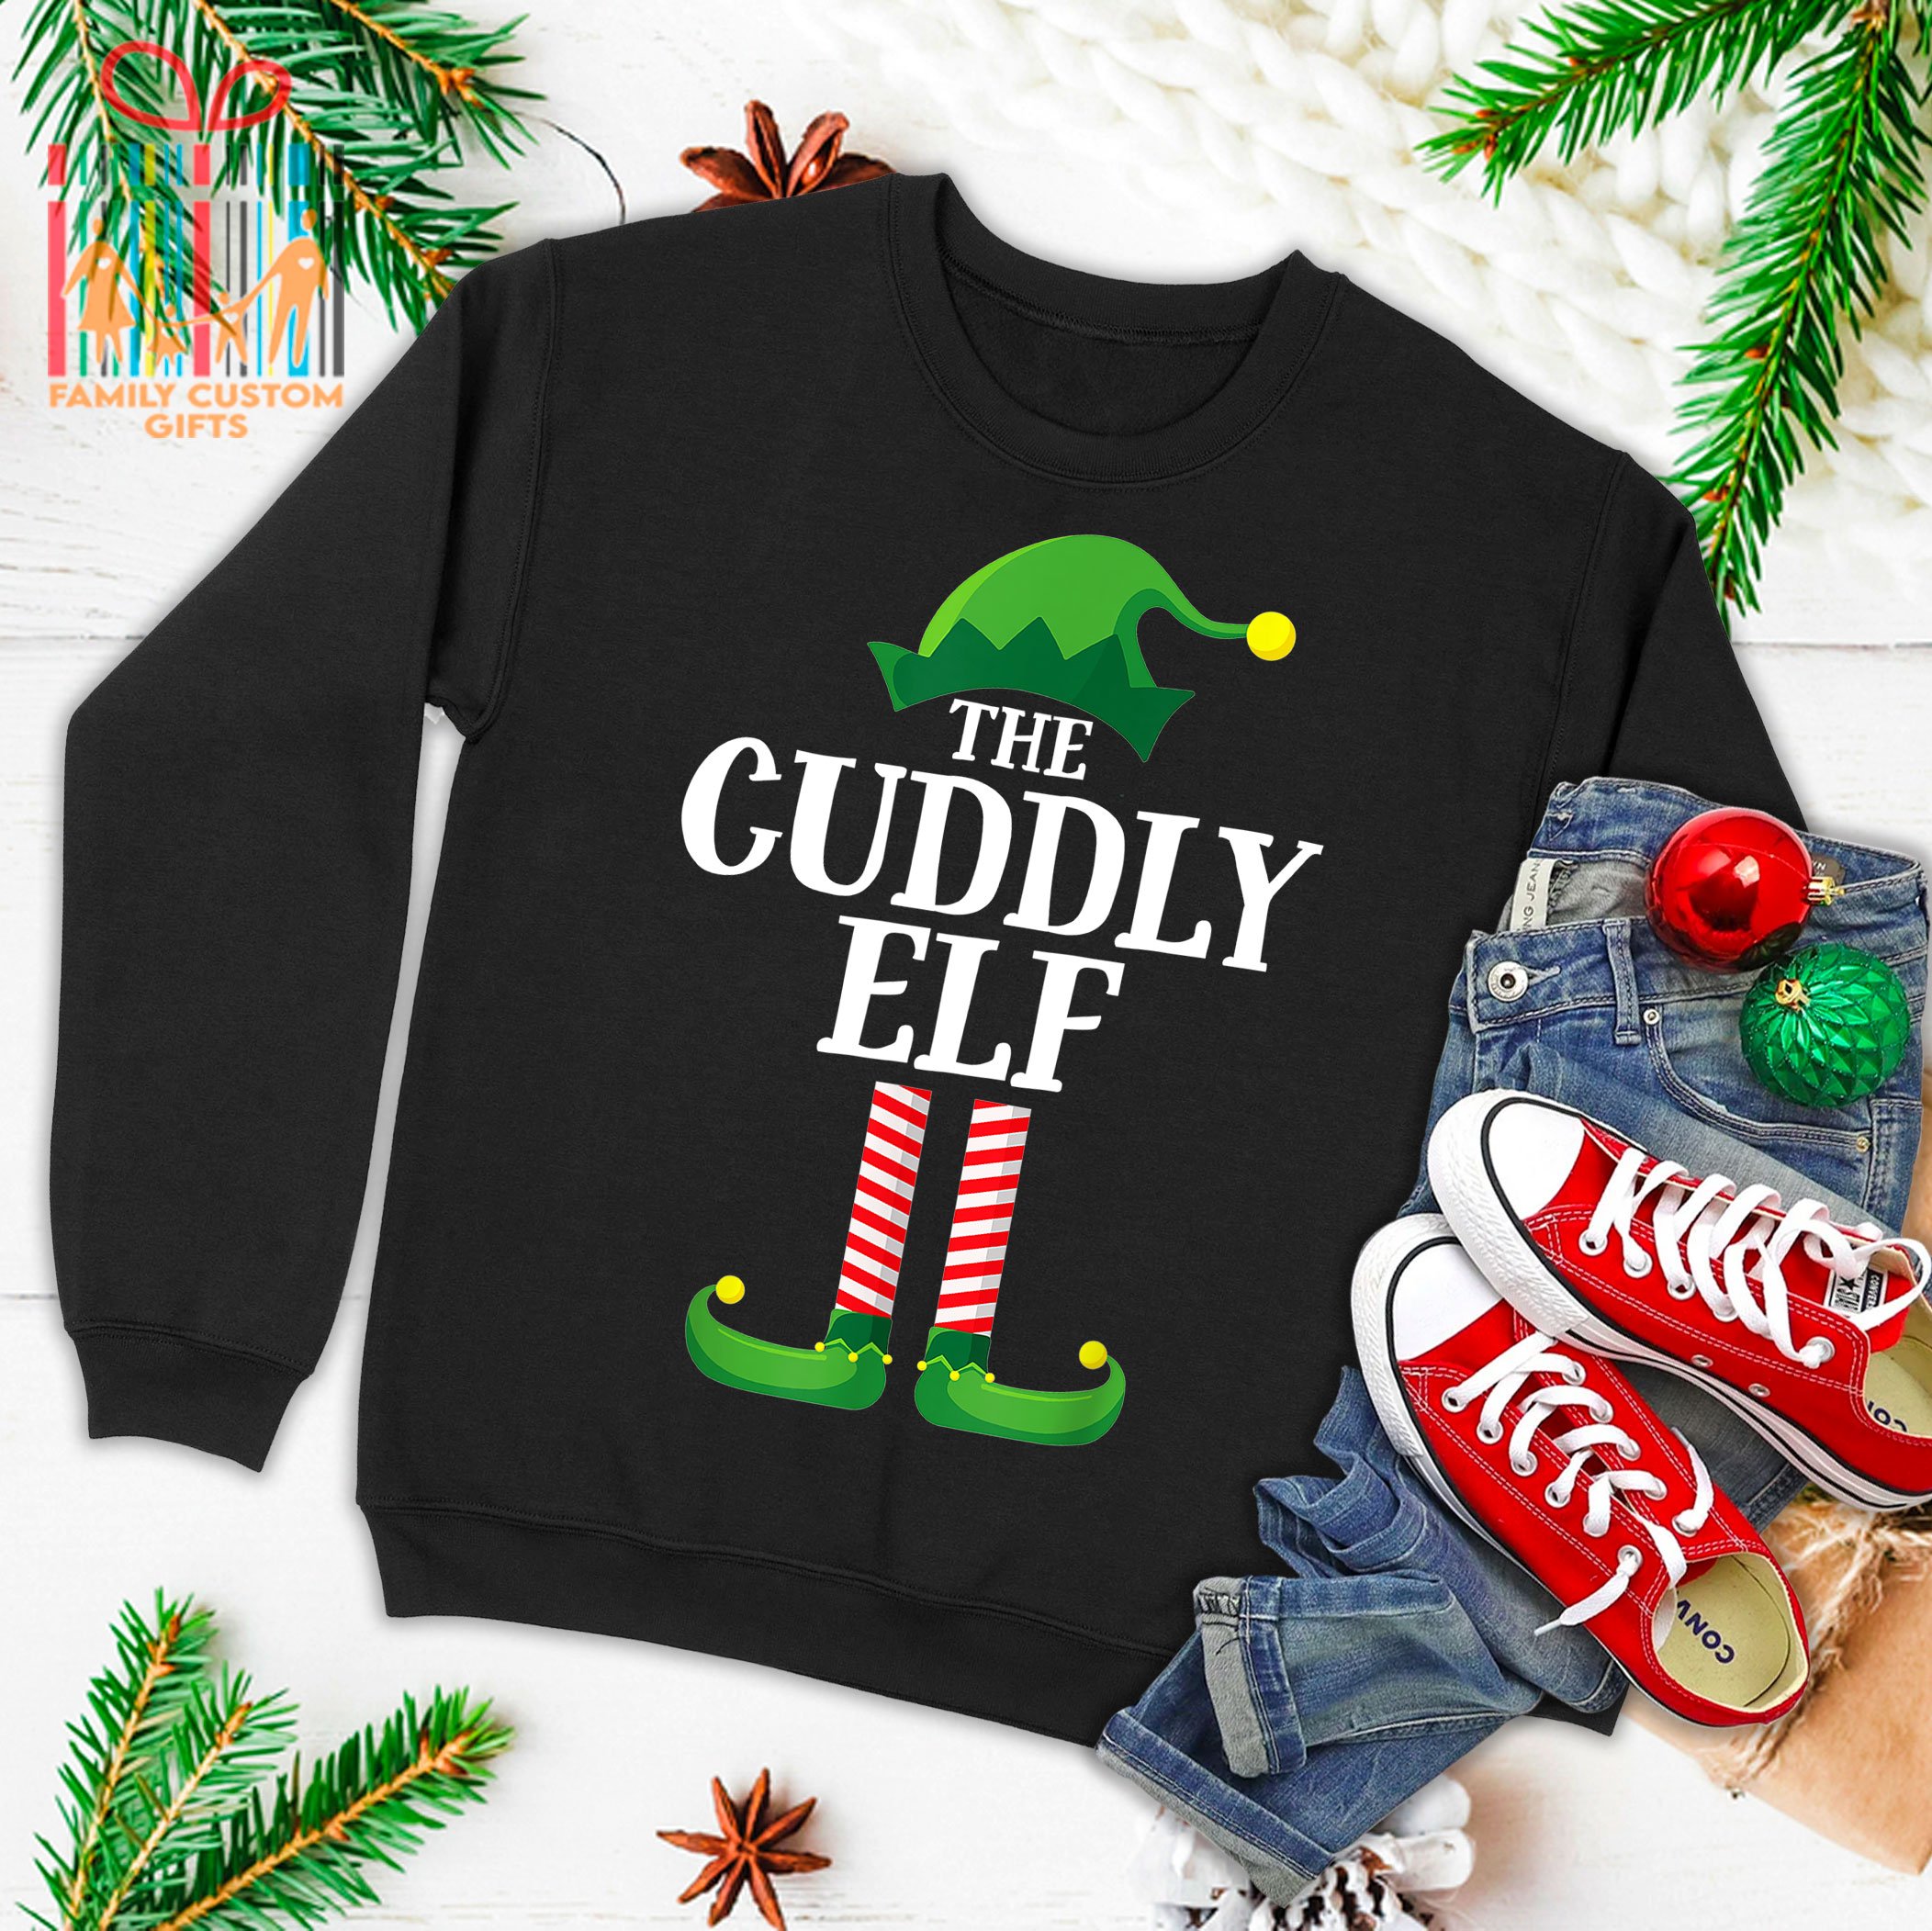 Cuddly Elf Matching Family Group Christmas Party Pajama Ugly Christmas Sweater 2023 T-Shirt